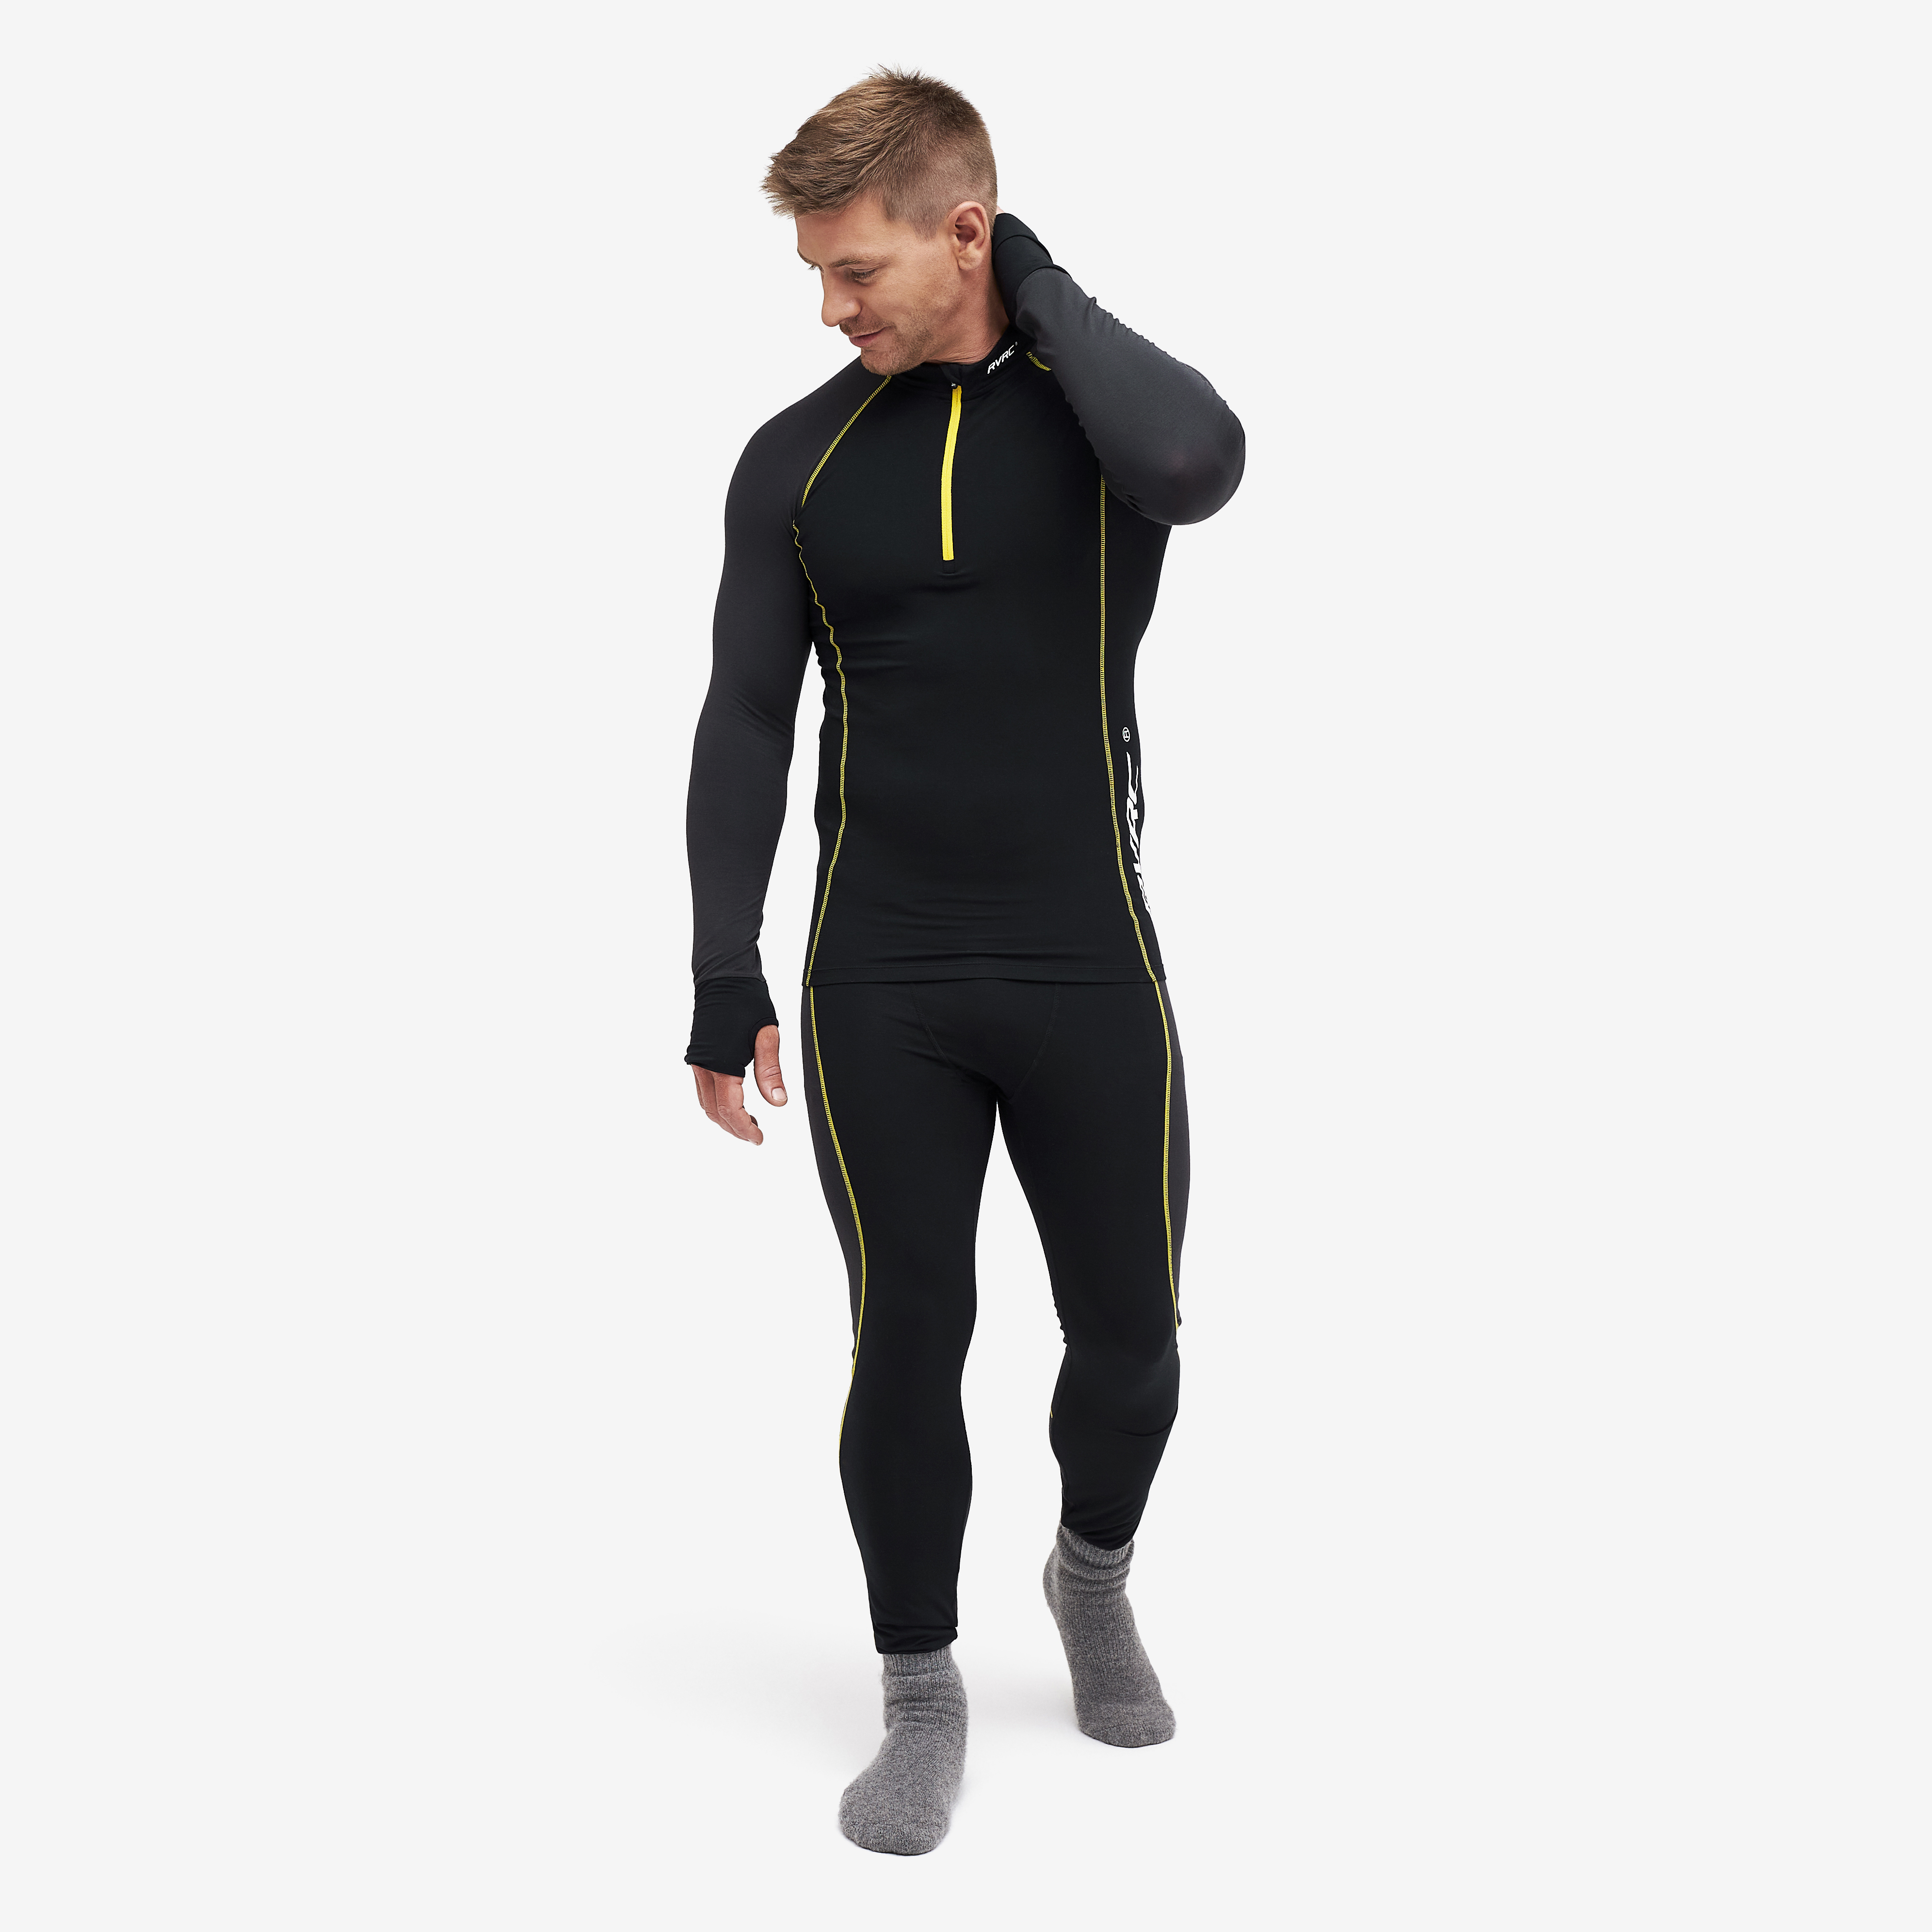 Bambooskin Base Layer Set Anthracite Hombres